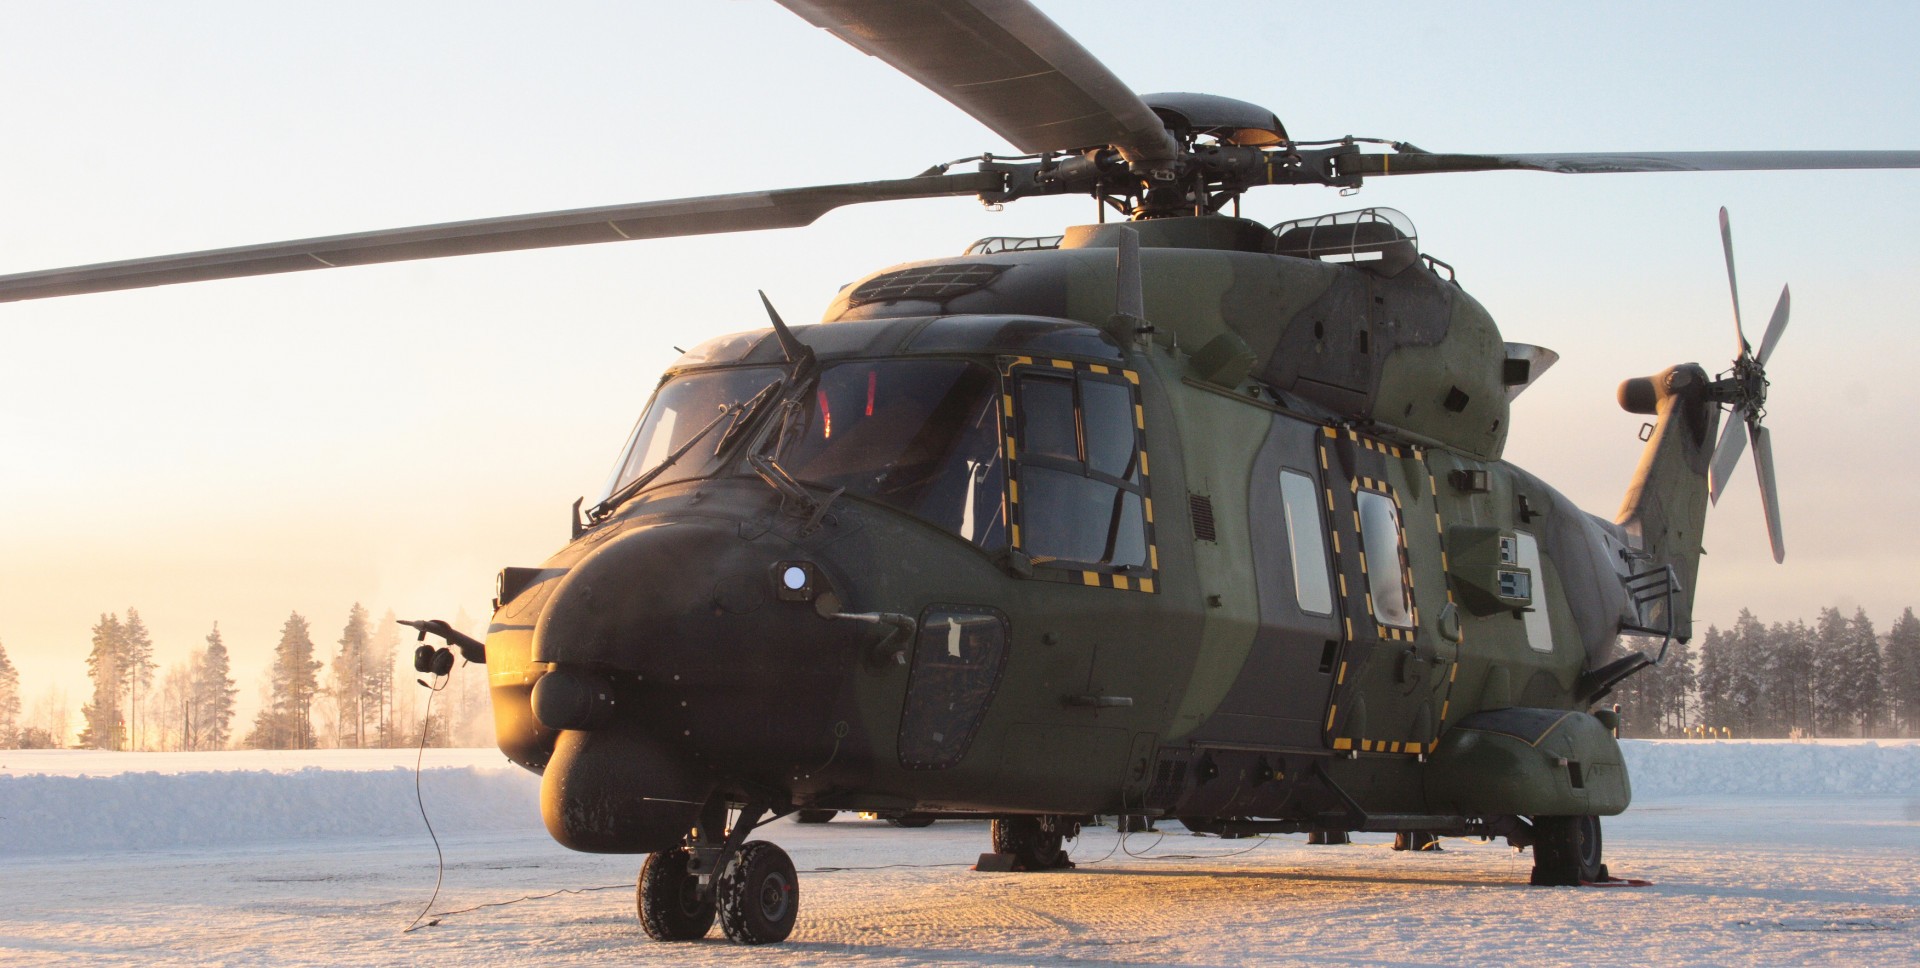 Patria started NH90 airframe maintenance work as an independent service provider in Finland since 2010 and in Norway since 2011.